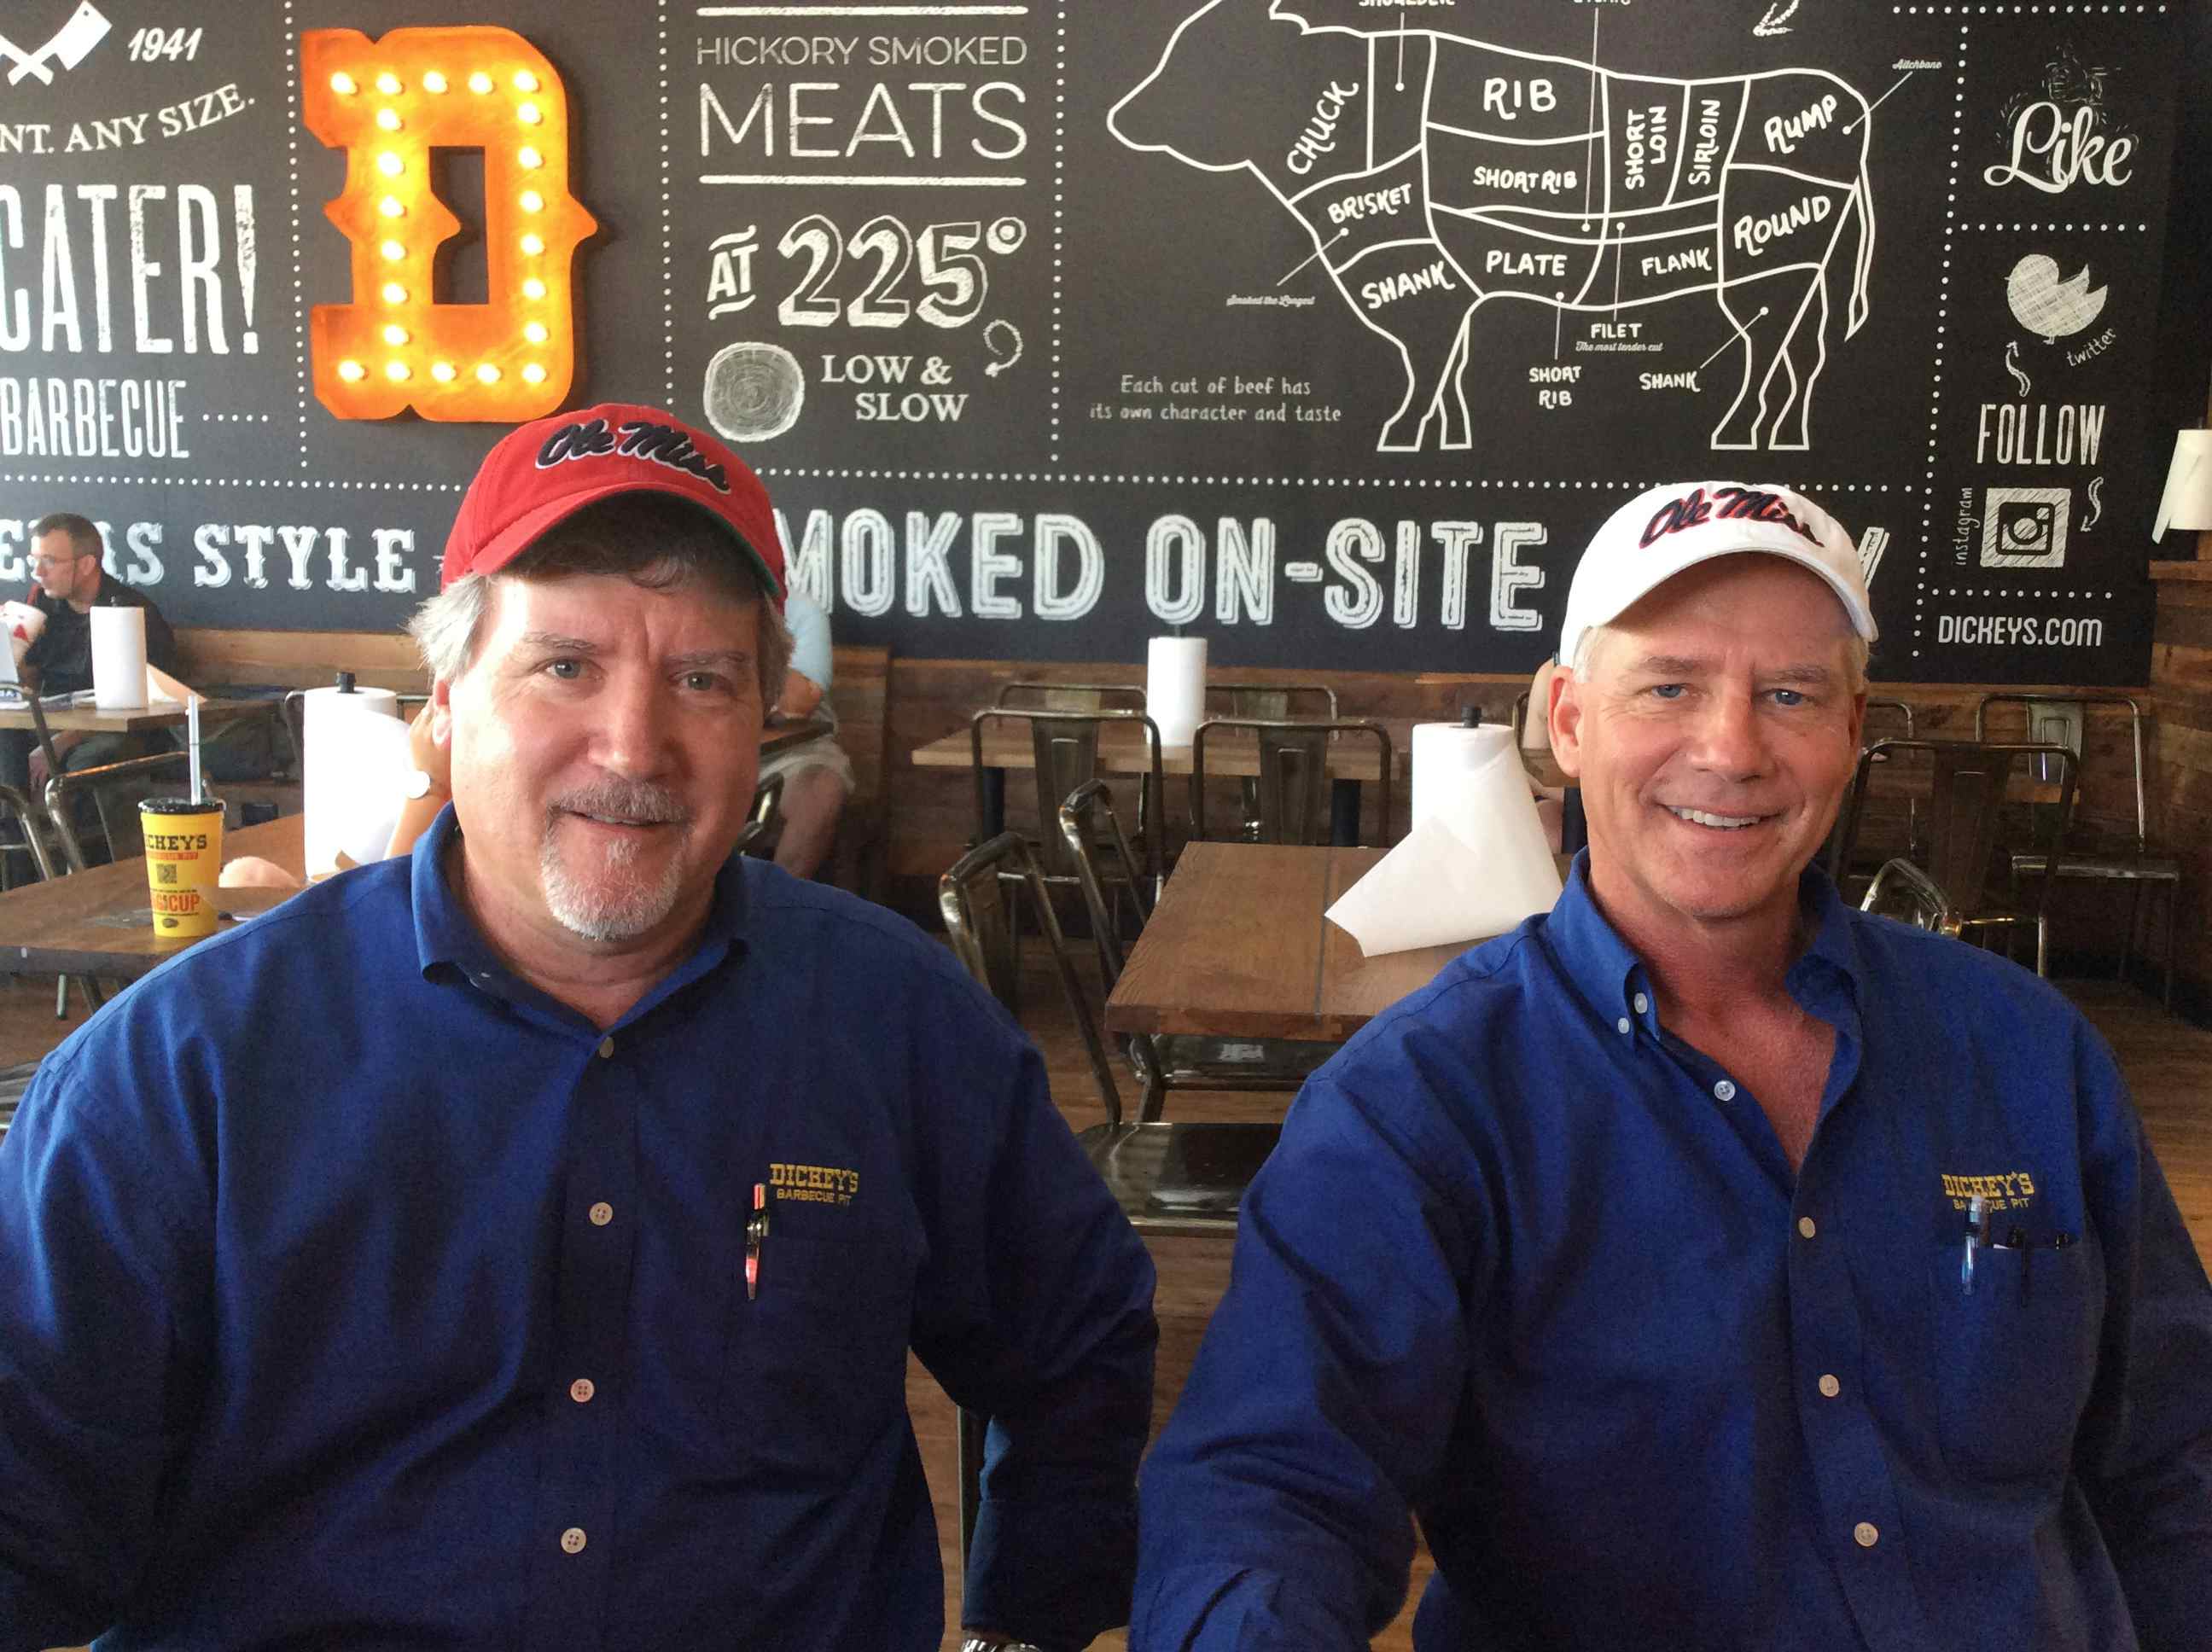 Eating Oxford: Dickey's Barbecue Pit Opens in Oxford